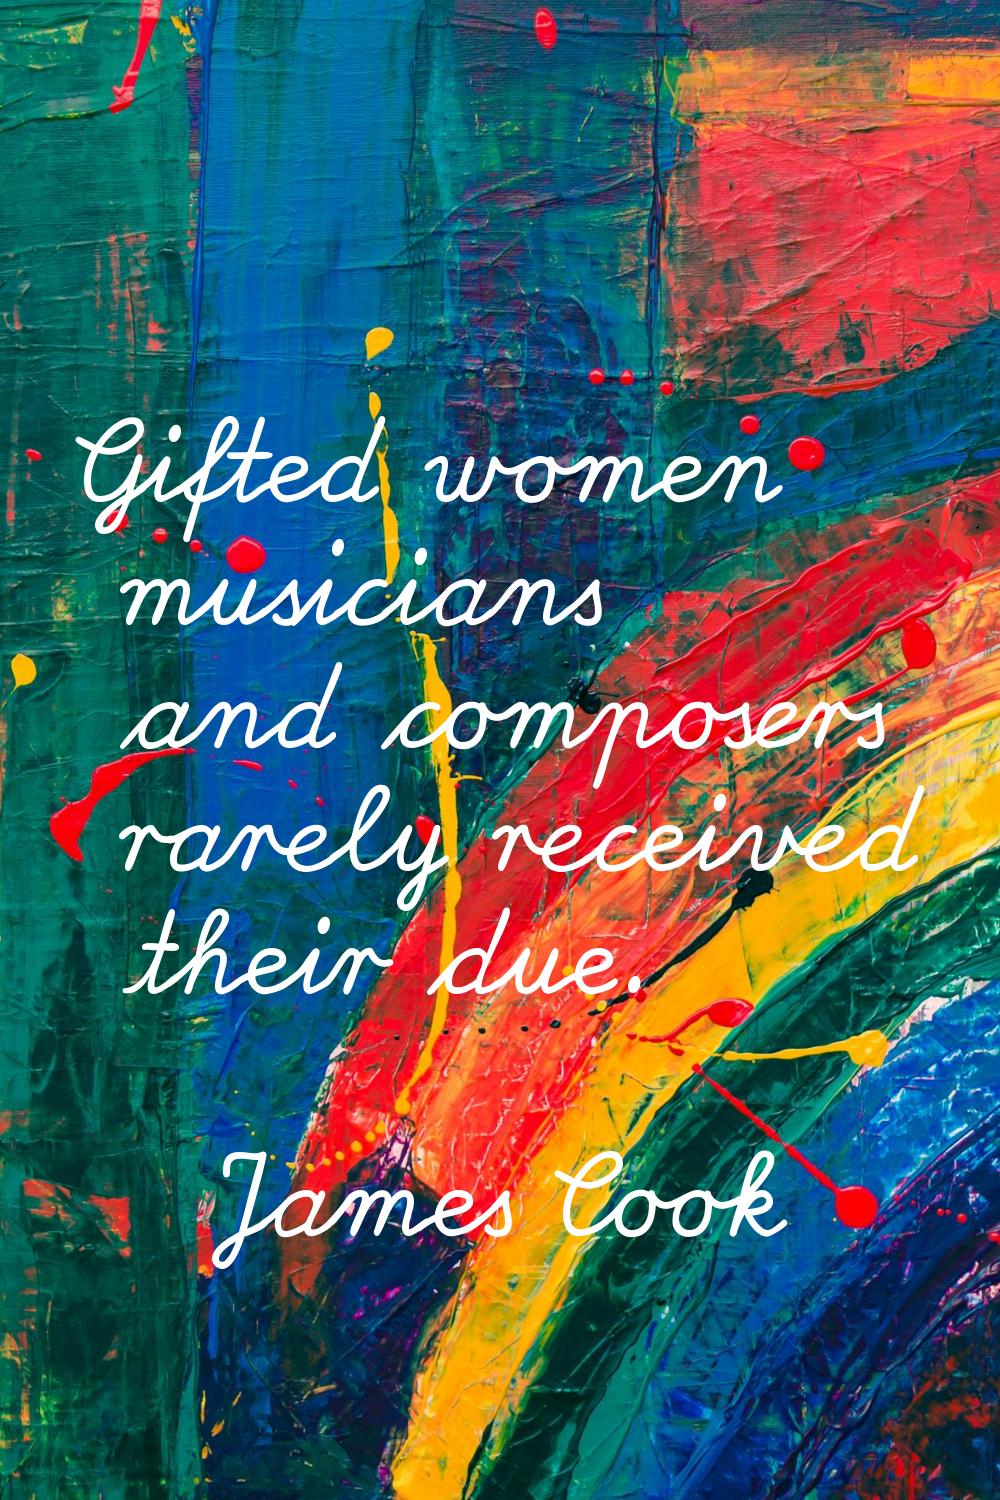 Gifted women musicians and composers rarely received their due.